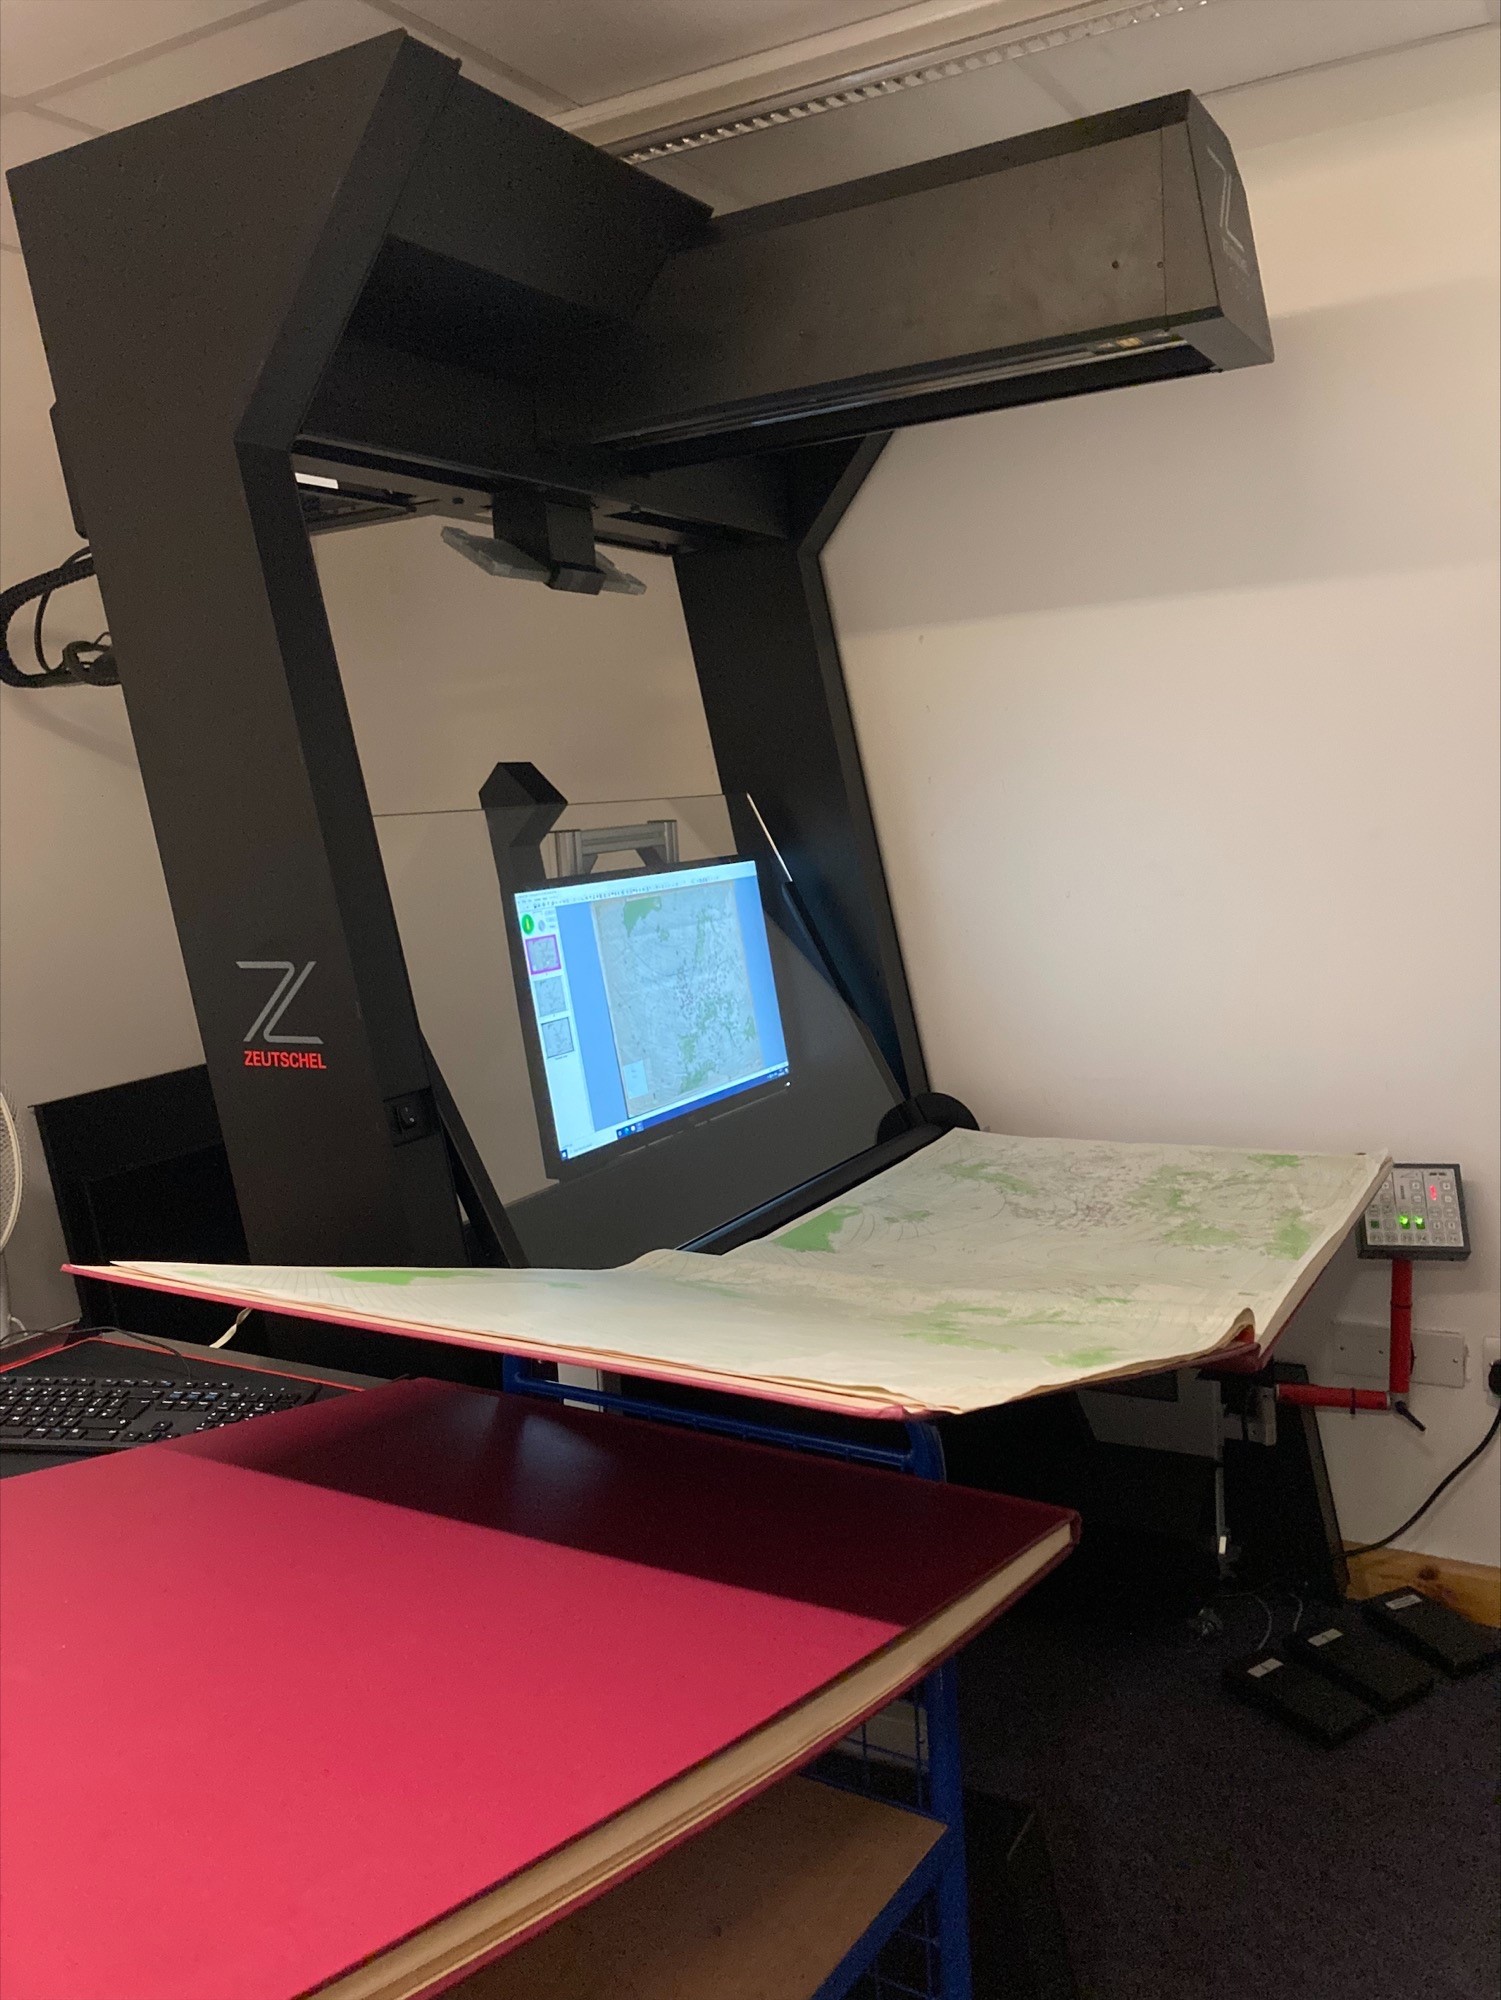 The Met Office Begins High Quality Digitization with the Zeutschel OS Q1